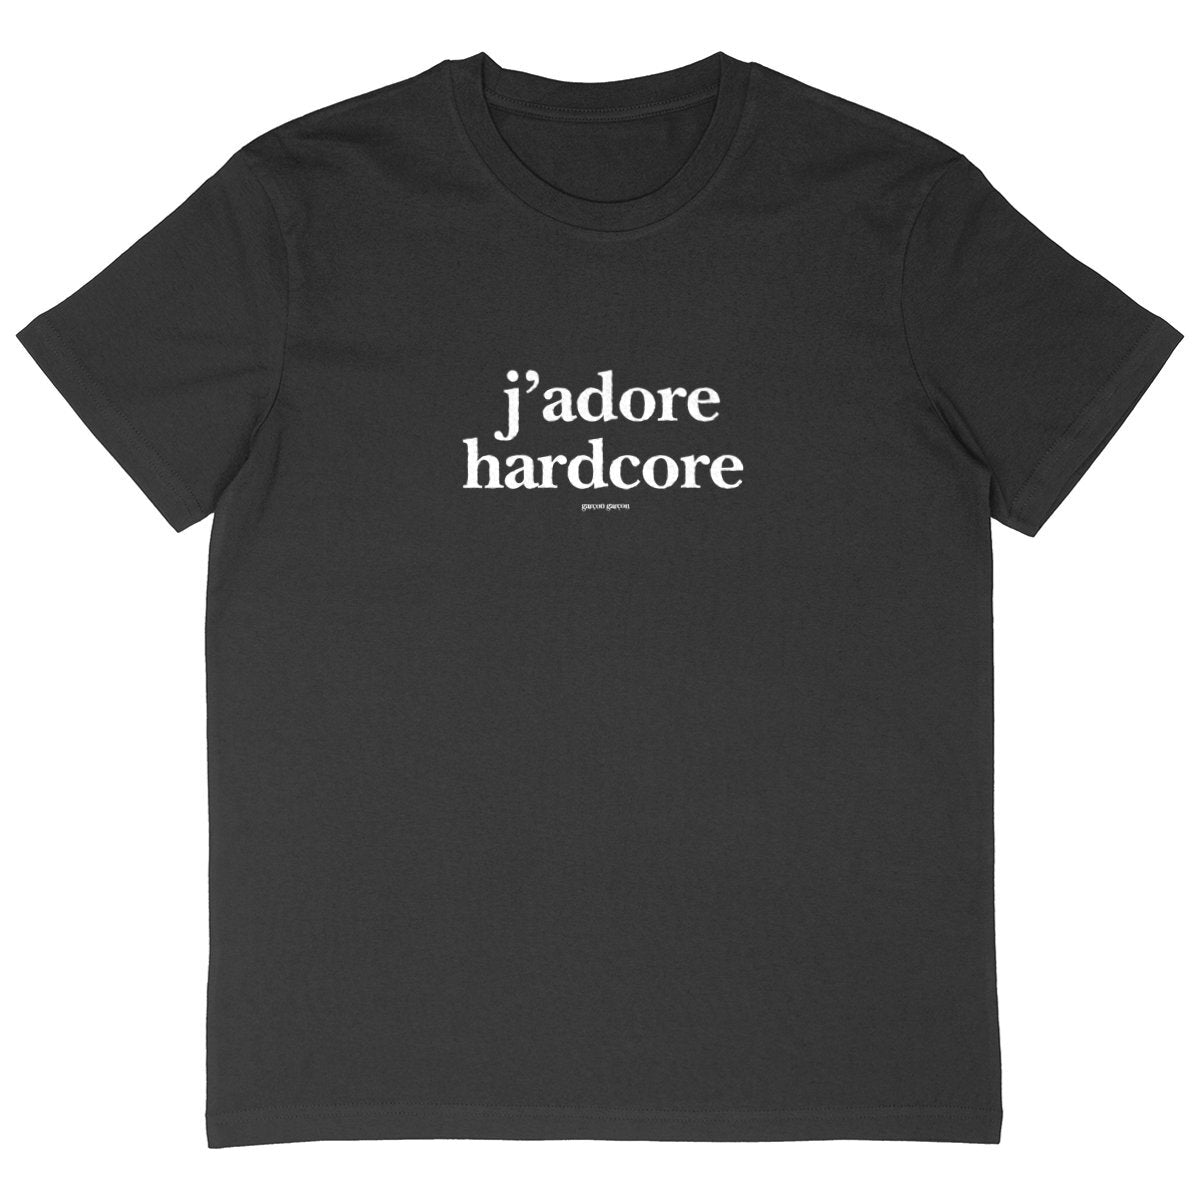 j'adore hardcore  tee oversized. garçon garçon tee oversize BLACK. Dive into the essence of Parisian cool with this oversized tee. The subtle 'garçon garçon' signature whispers a chic narrative, offering a slice of the city's famed elegance. Perfect for those who speak style with simplicity.